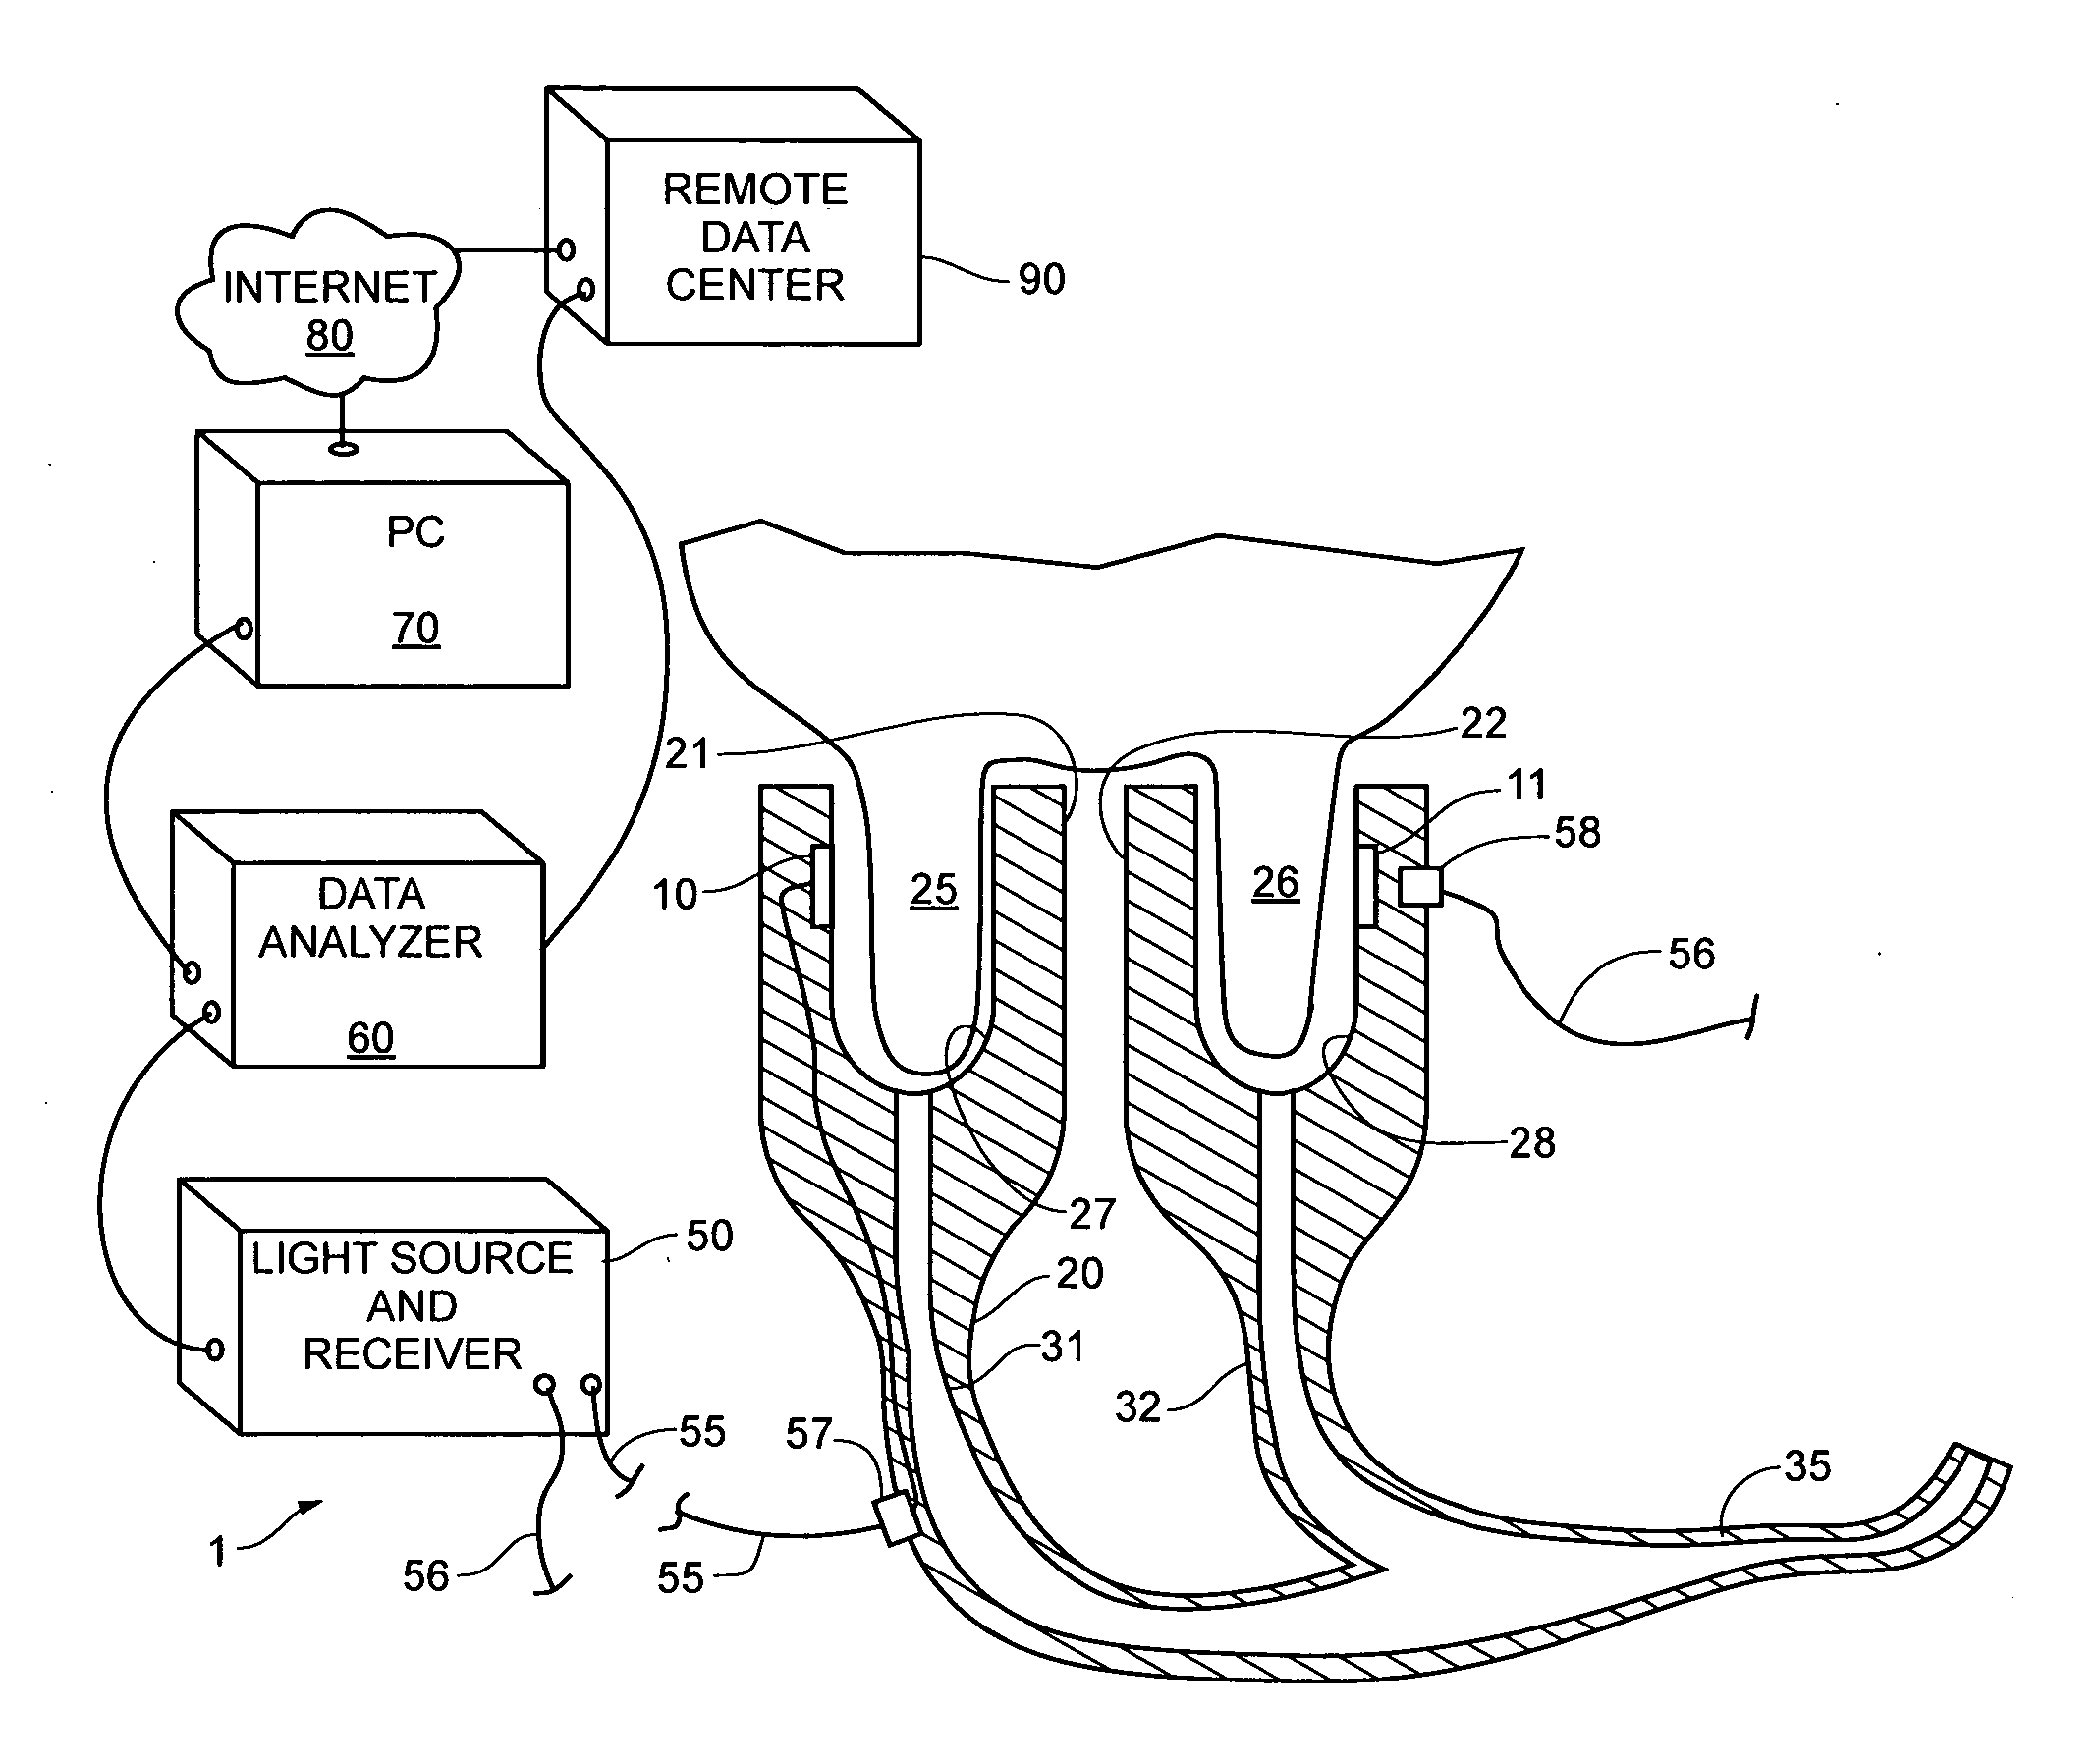 Device, system and method of non-invasive diagnosis of mastitis in a dairy cow